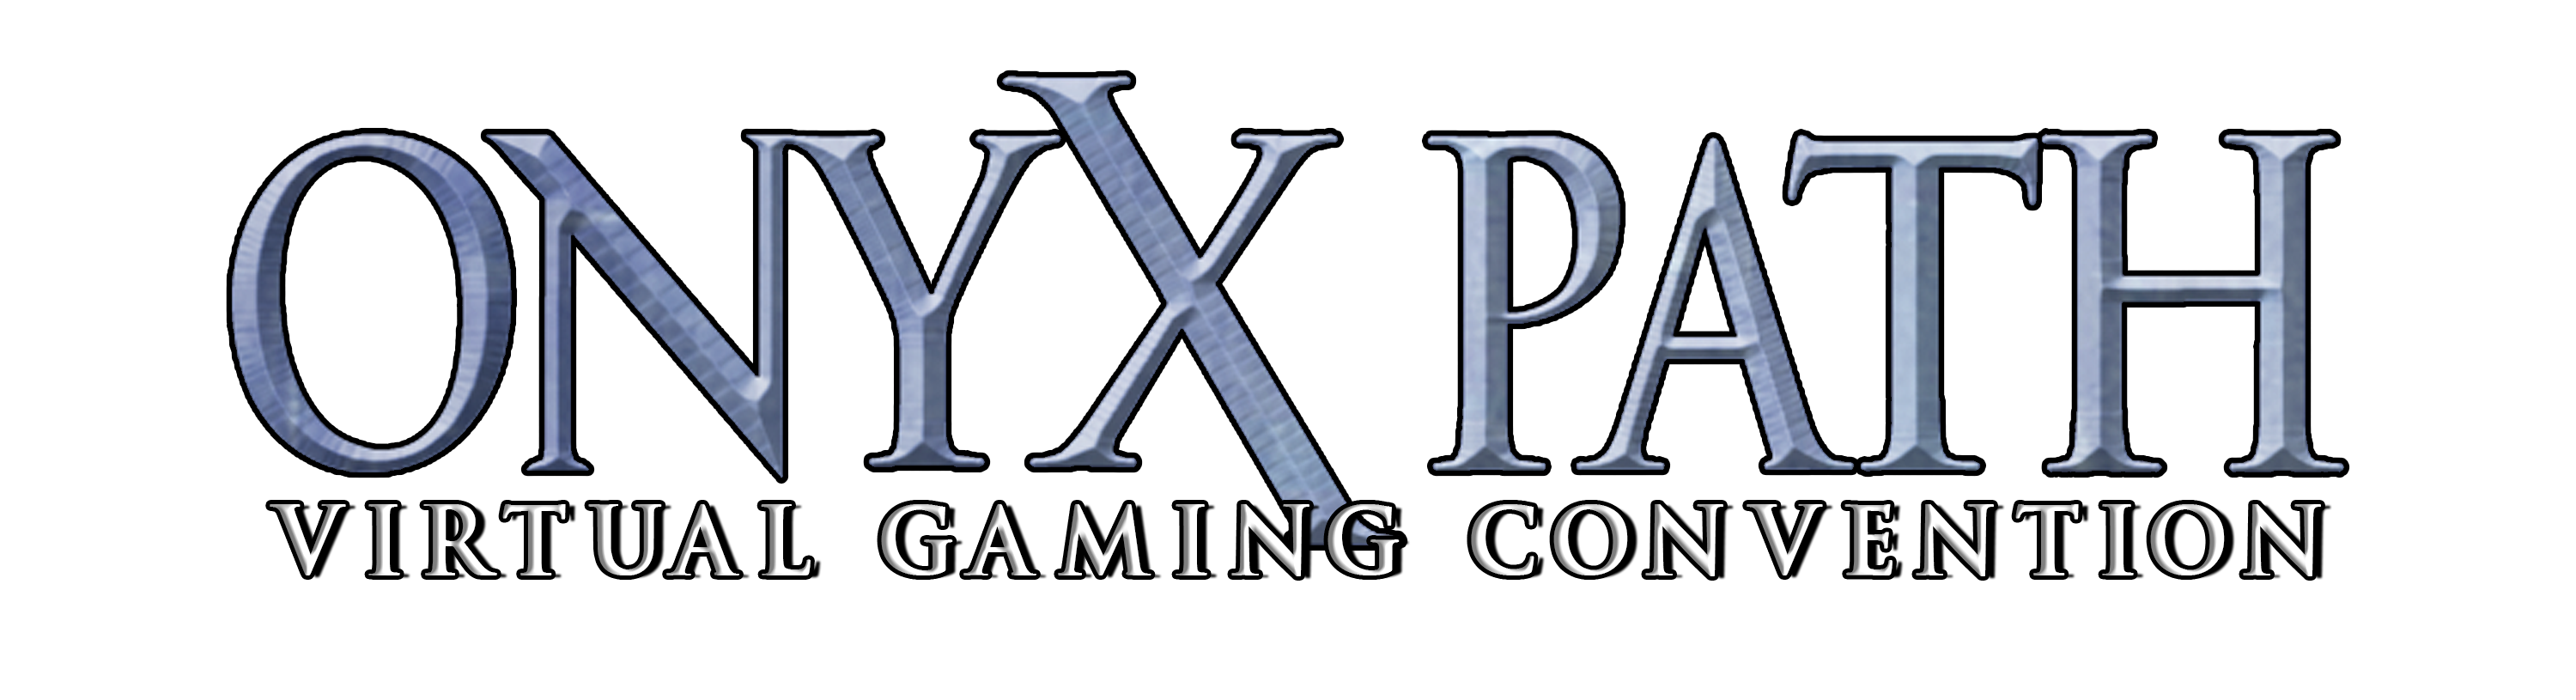 Onyx Path Virtual Gaming Convention Starts Today!